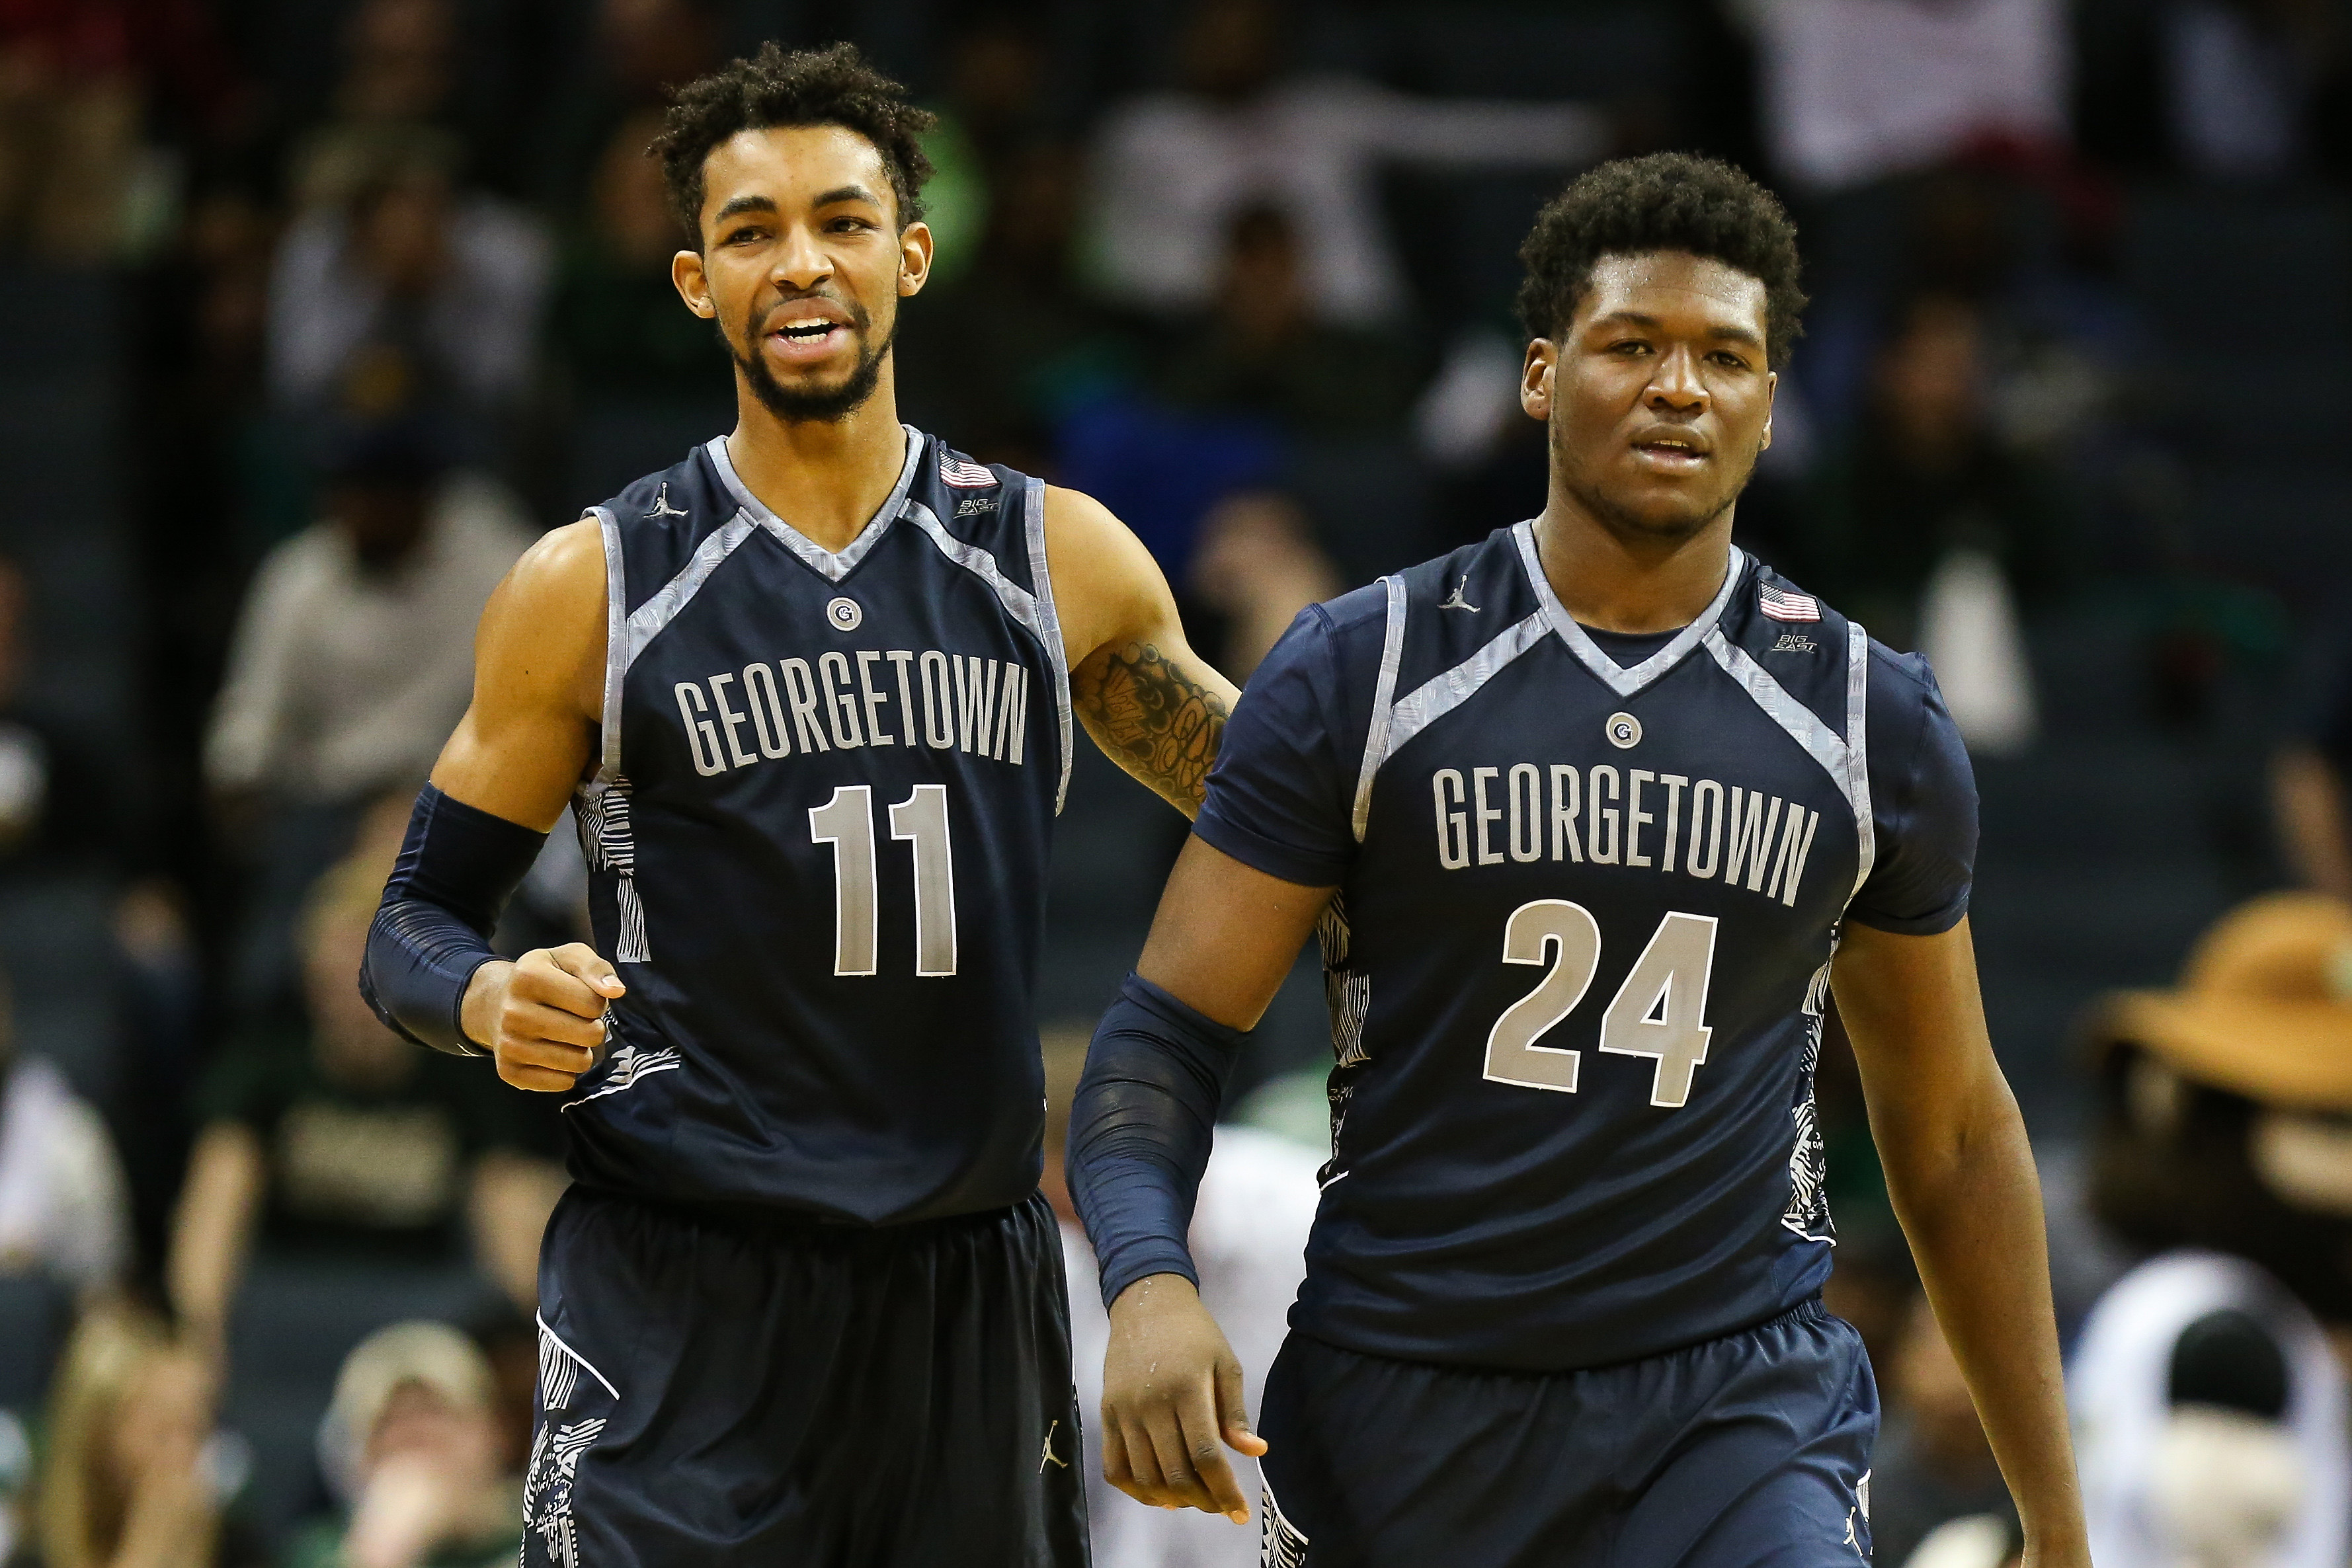 Georgetown hangs on to beat Charlotte 62-59 | wusa9.com